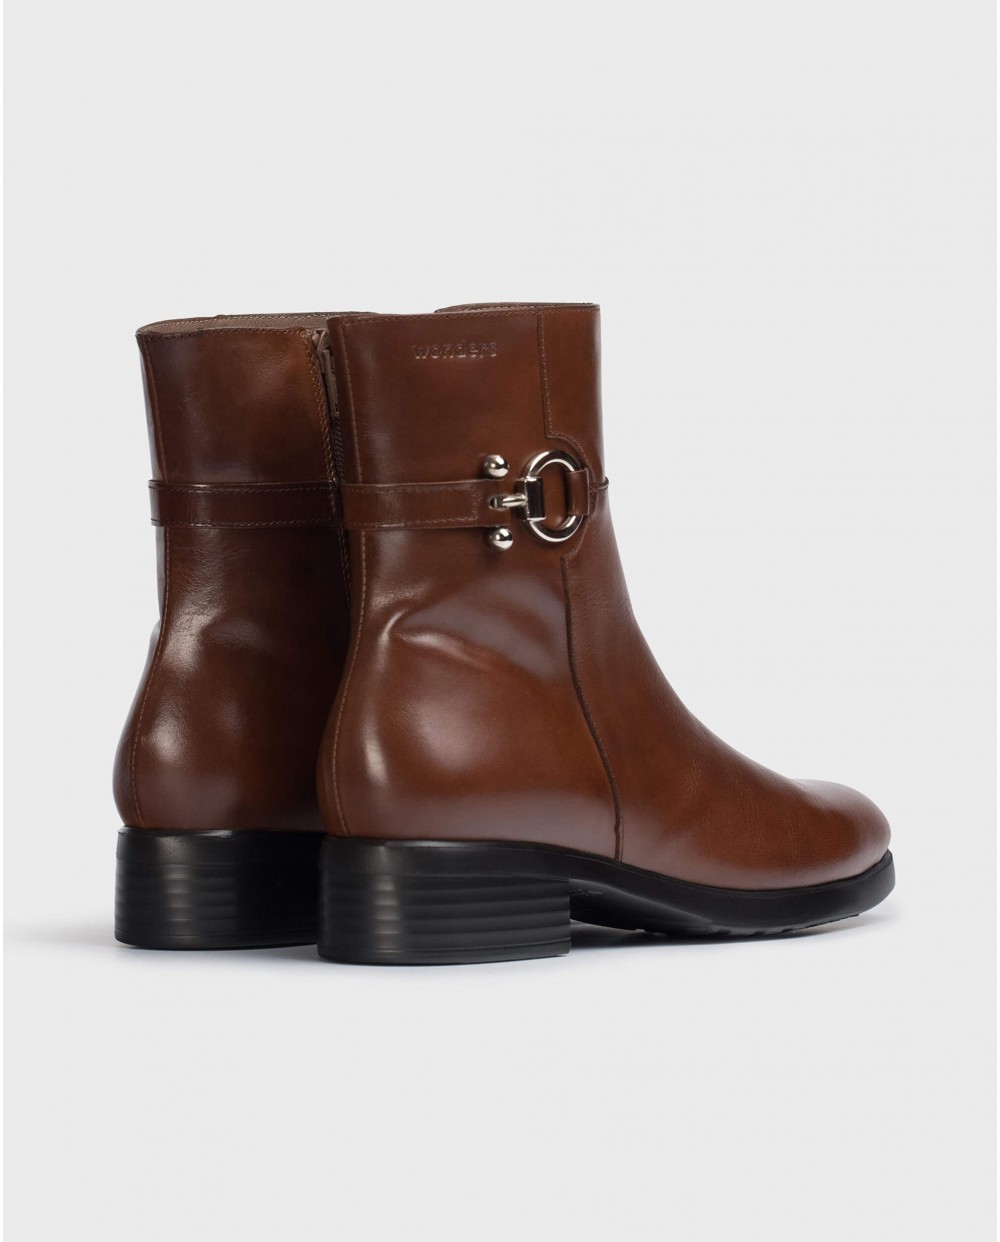 Wonders-Ankle Boots-Brown Dot Ankle Boot